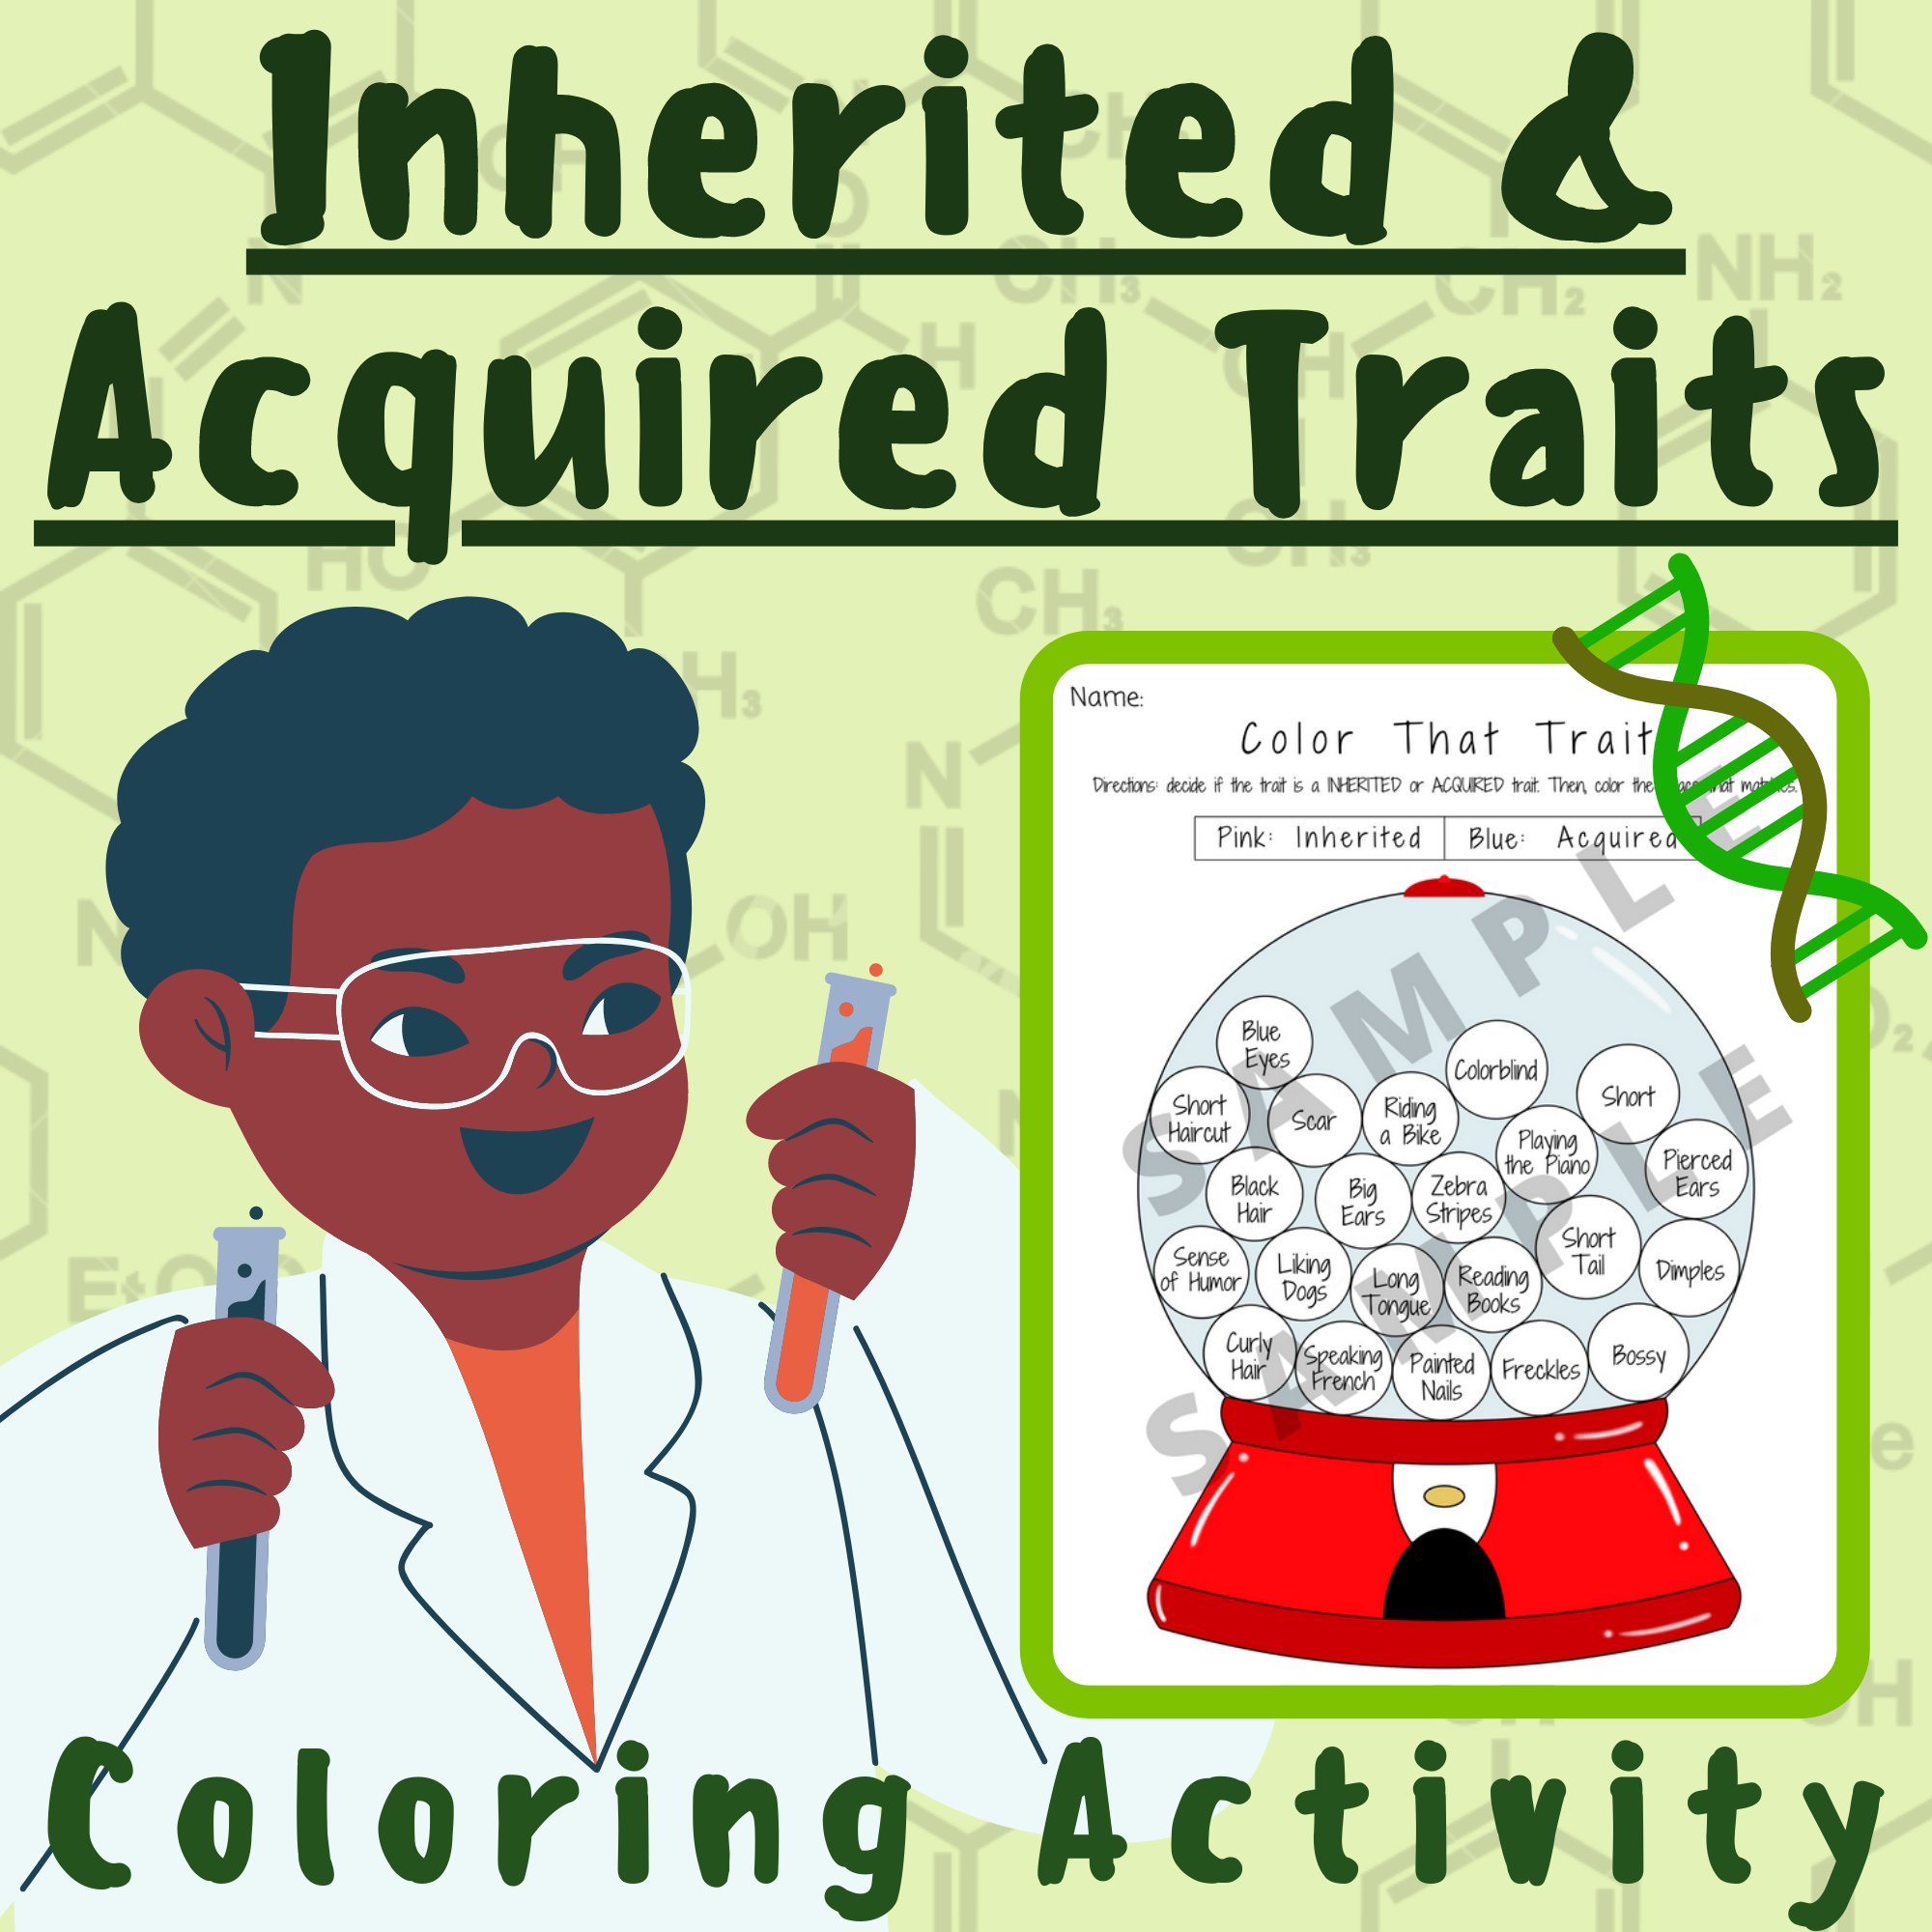 Heredity Inherited and Acquired Traits Coloring Activity Worksheet; For K-12 Teachers and Students in the Science and Biology Classroom